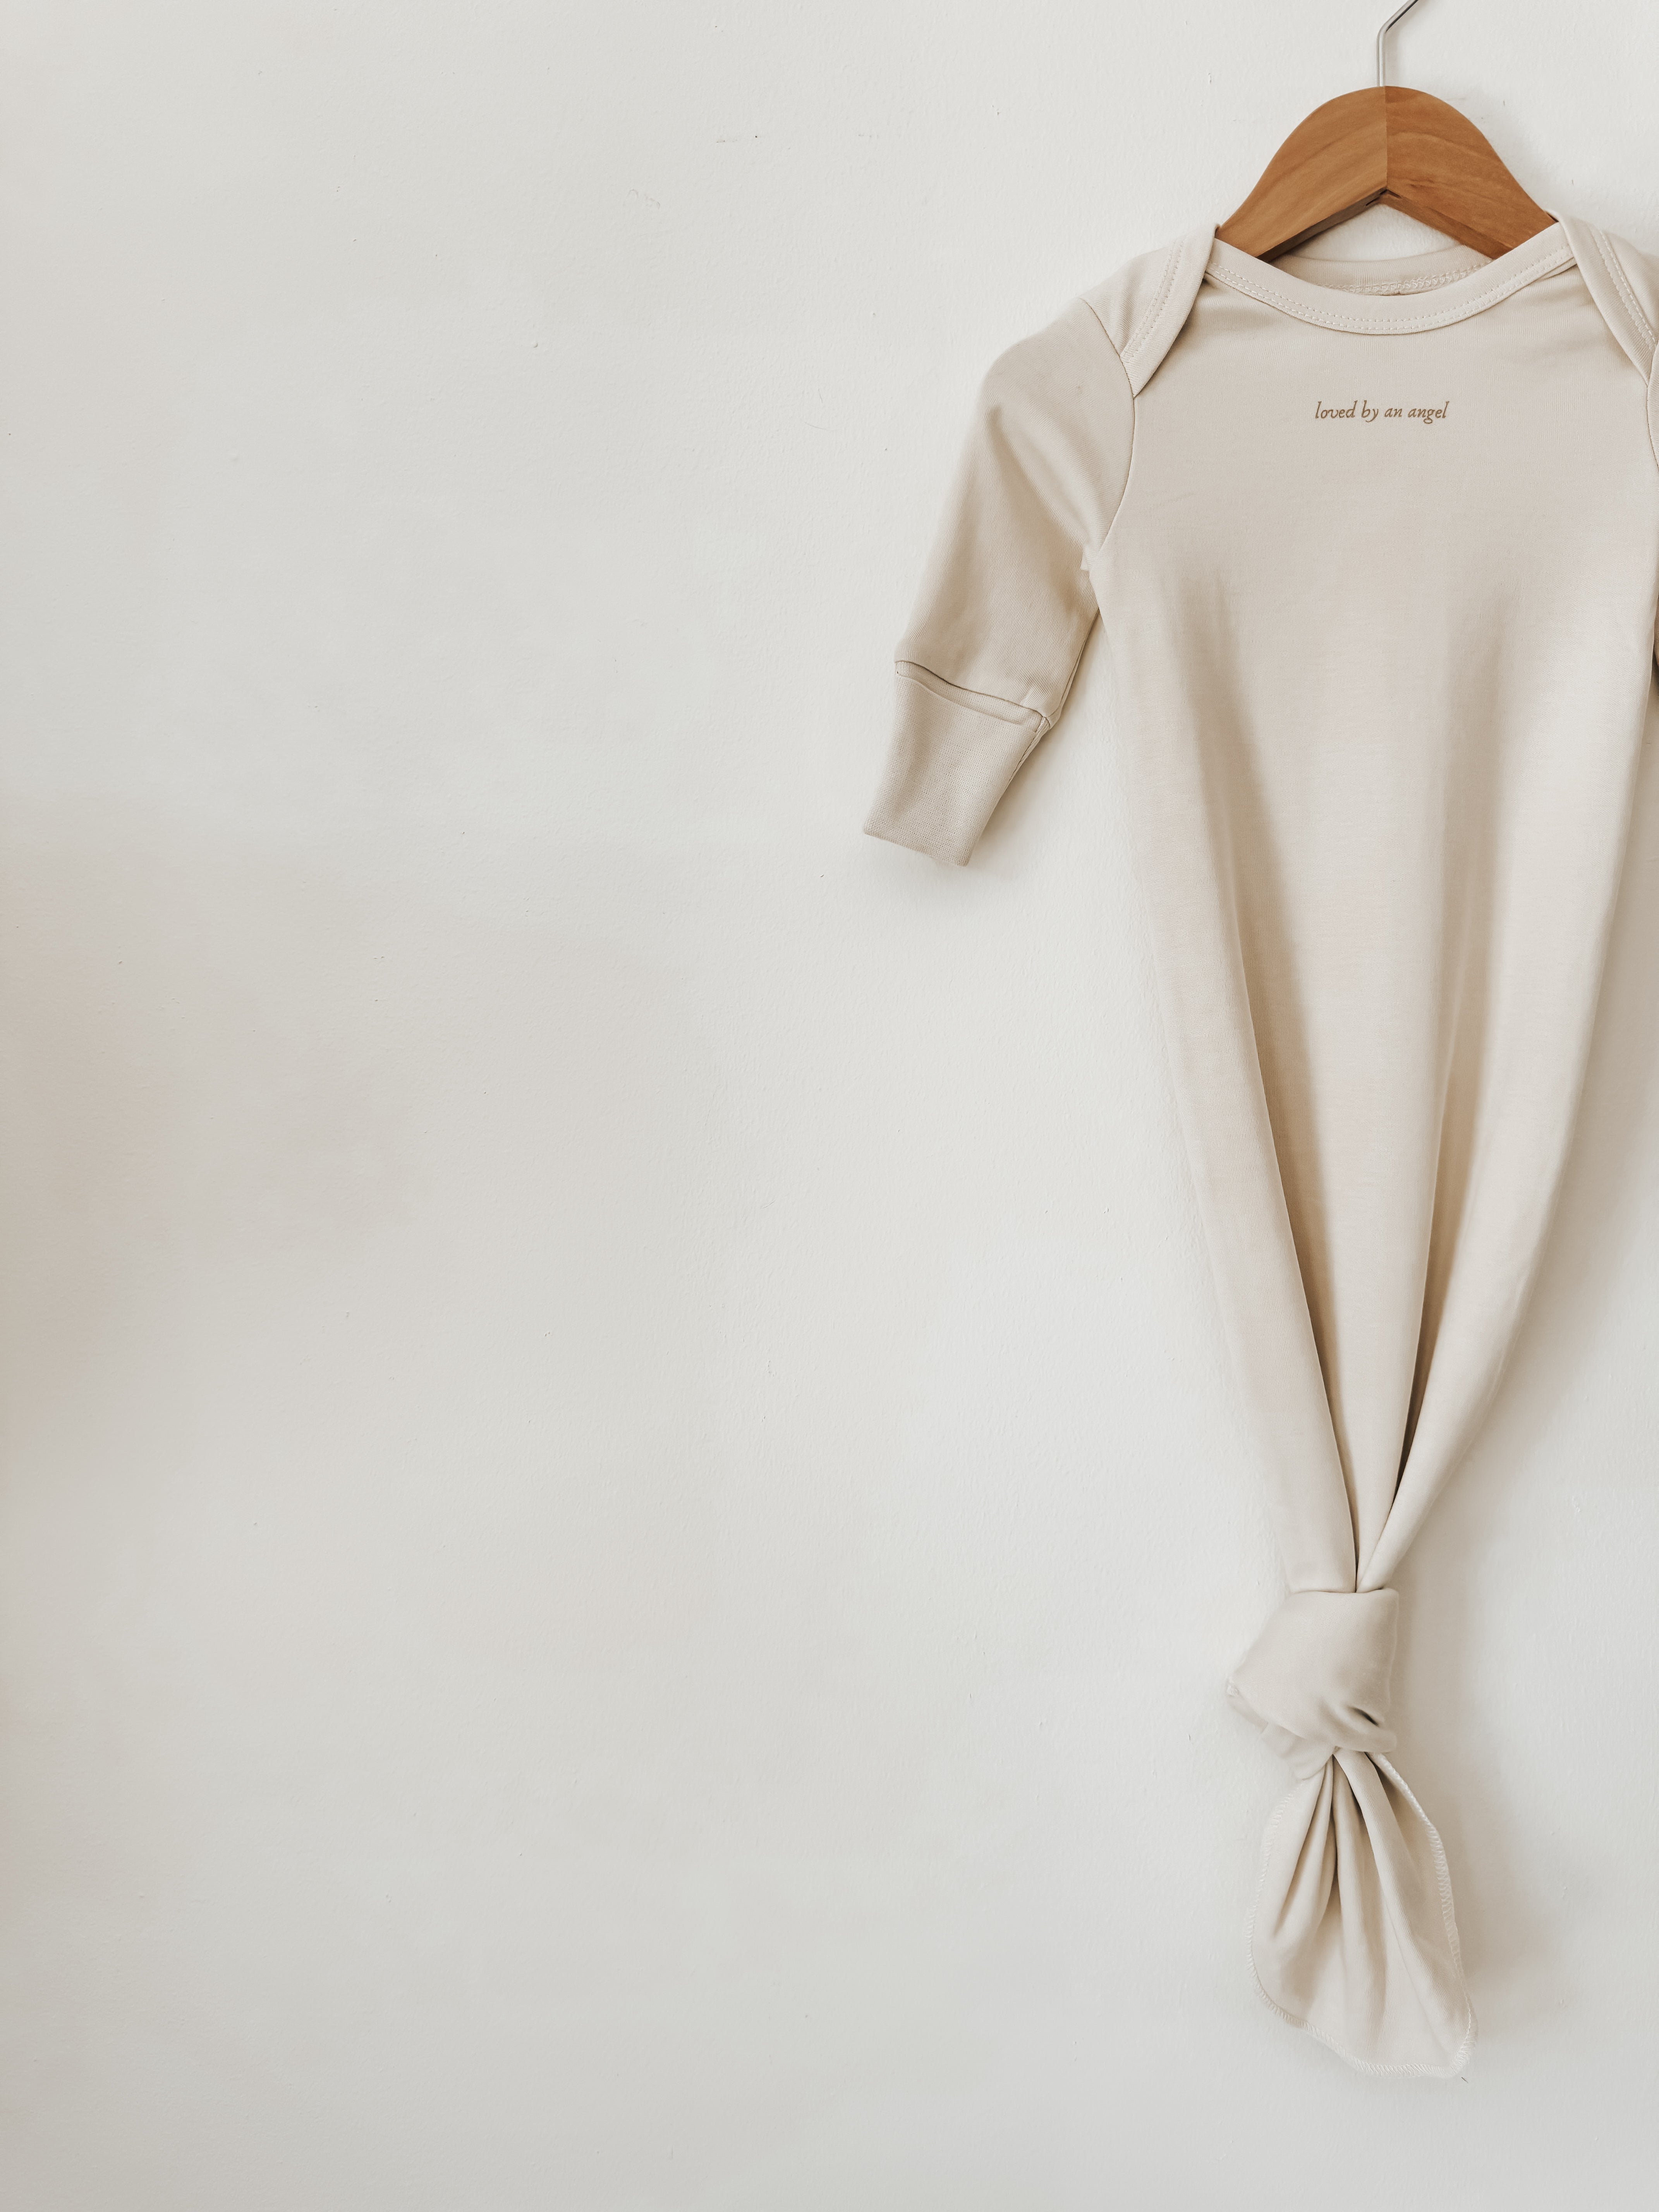 Classic Knotted Gown | Loved By An Angel